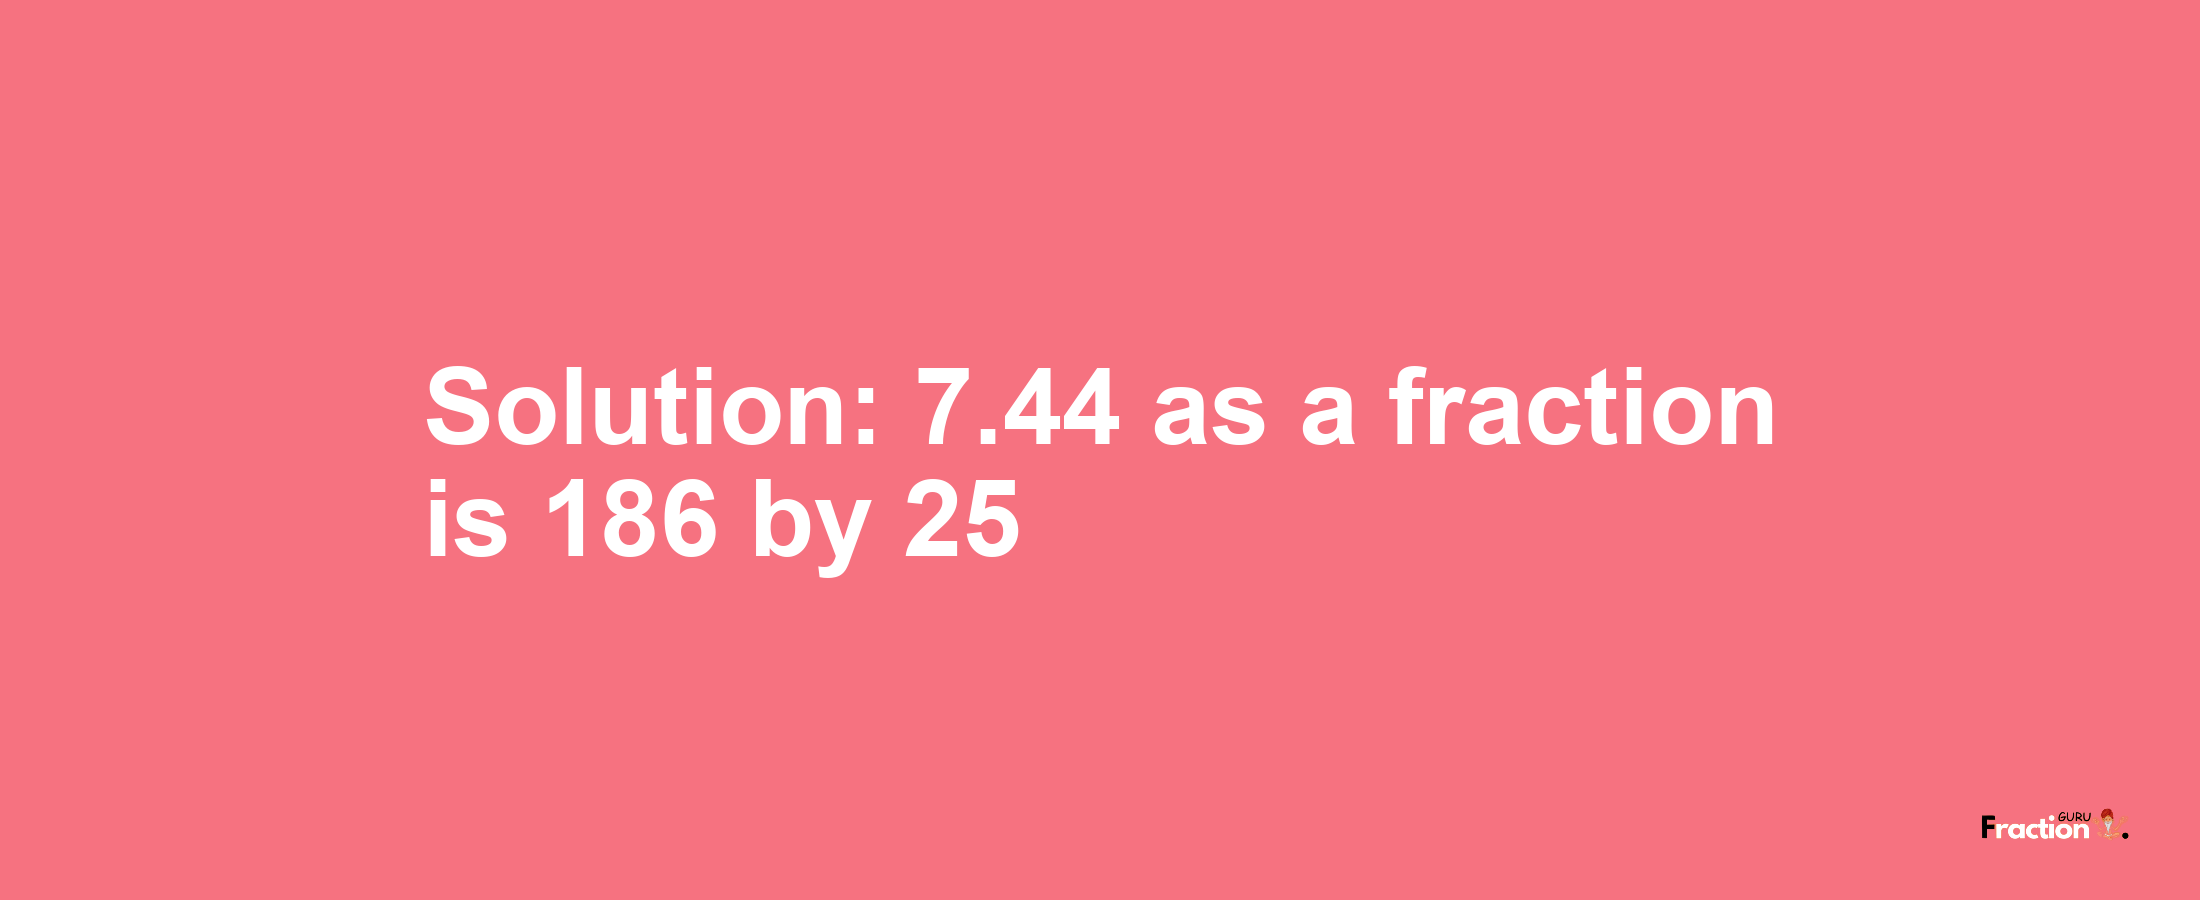 Solution:7.44 as a fraction is 186/25